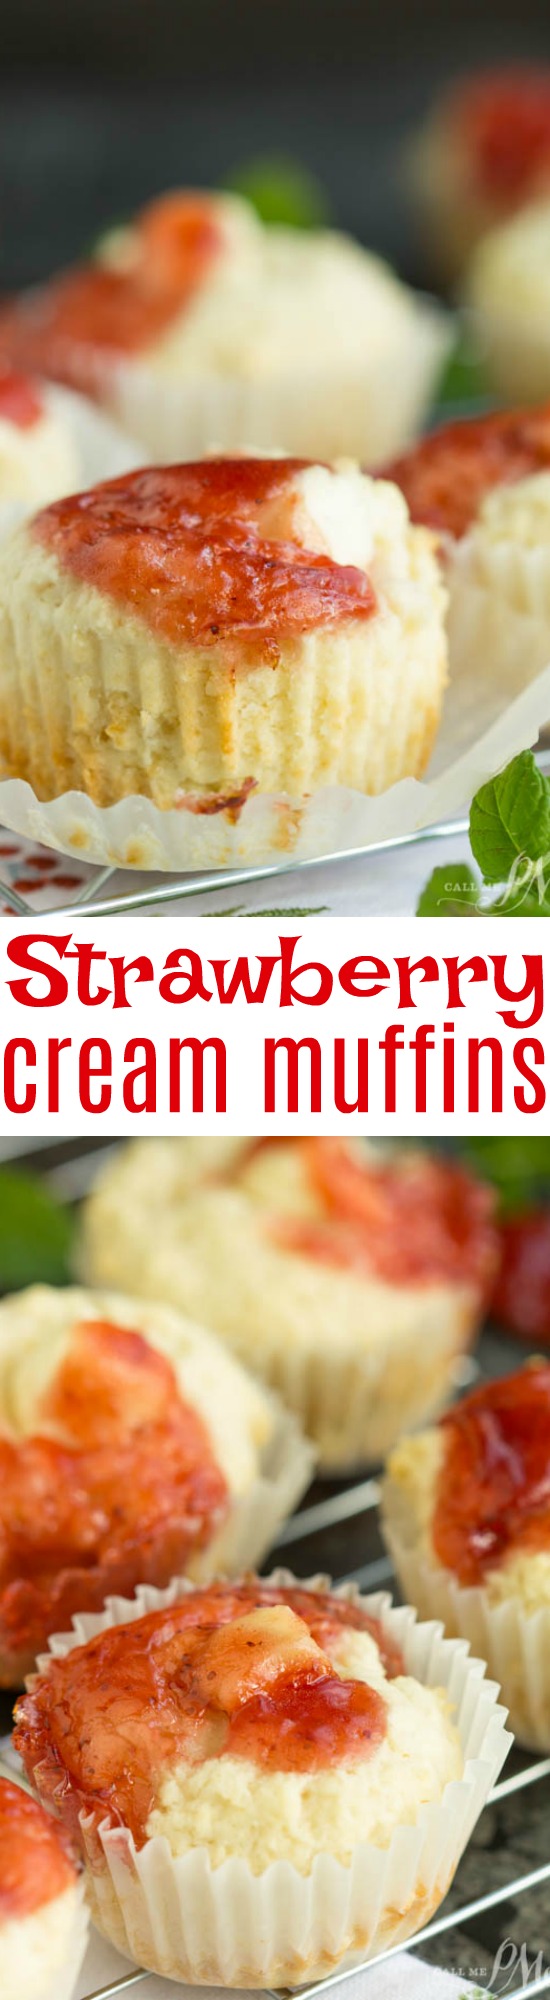 A necessary indulgence any day of the week, Strawberry Cream Muffins are filled with cream cheese and strawberry jam.